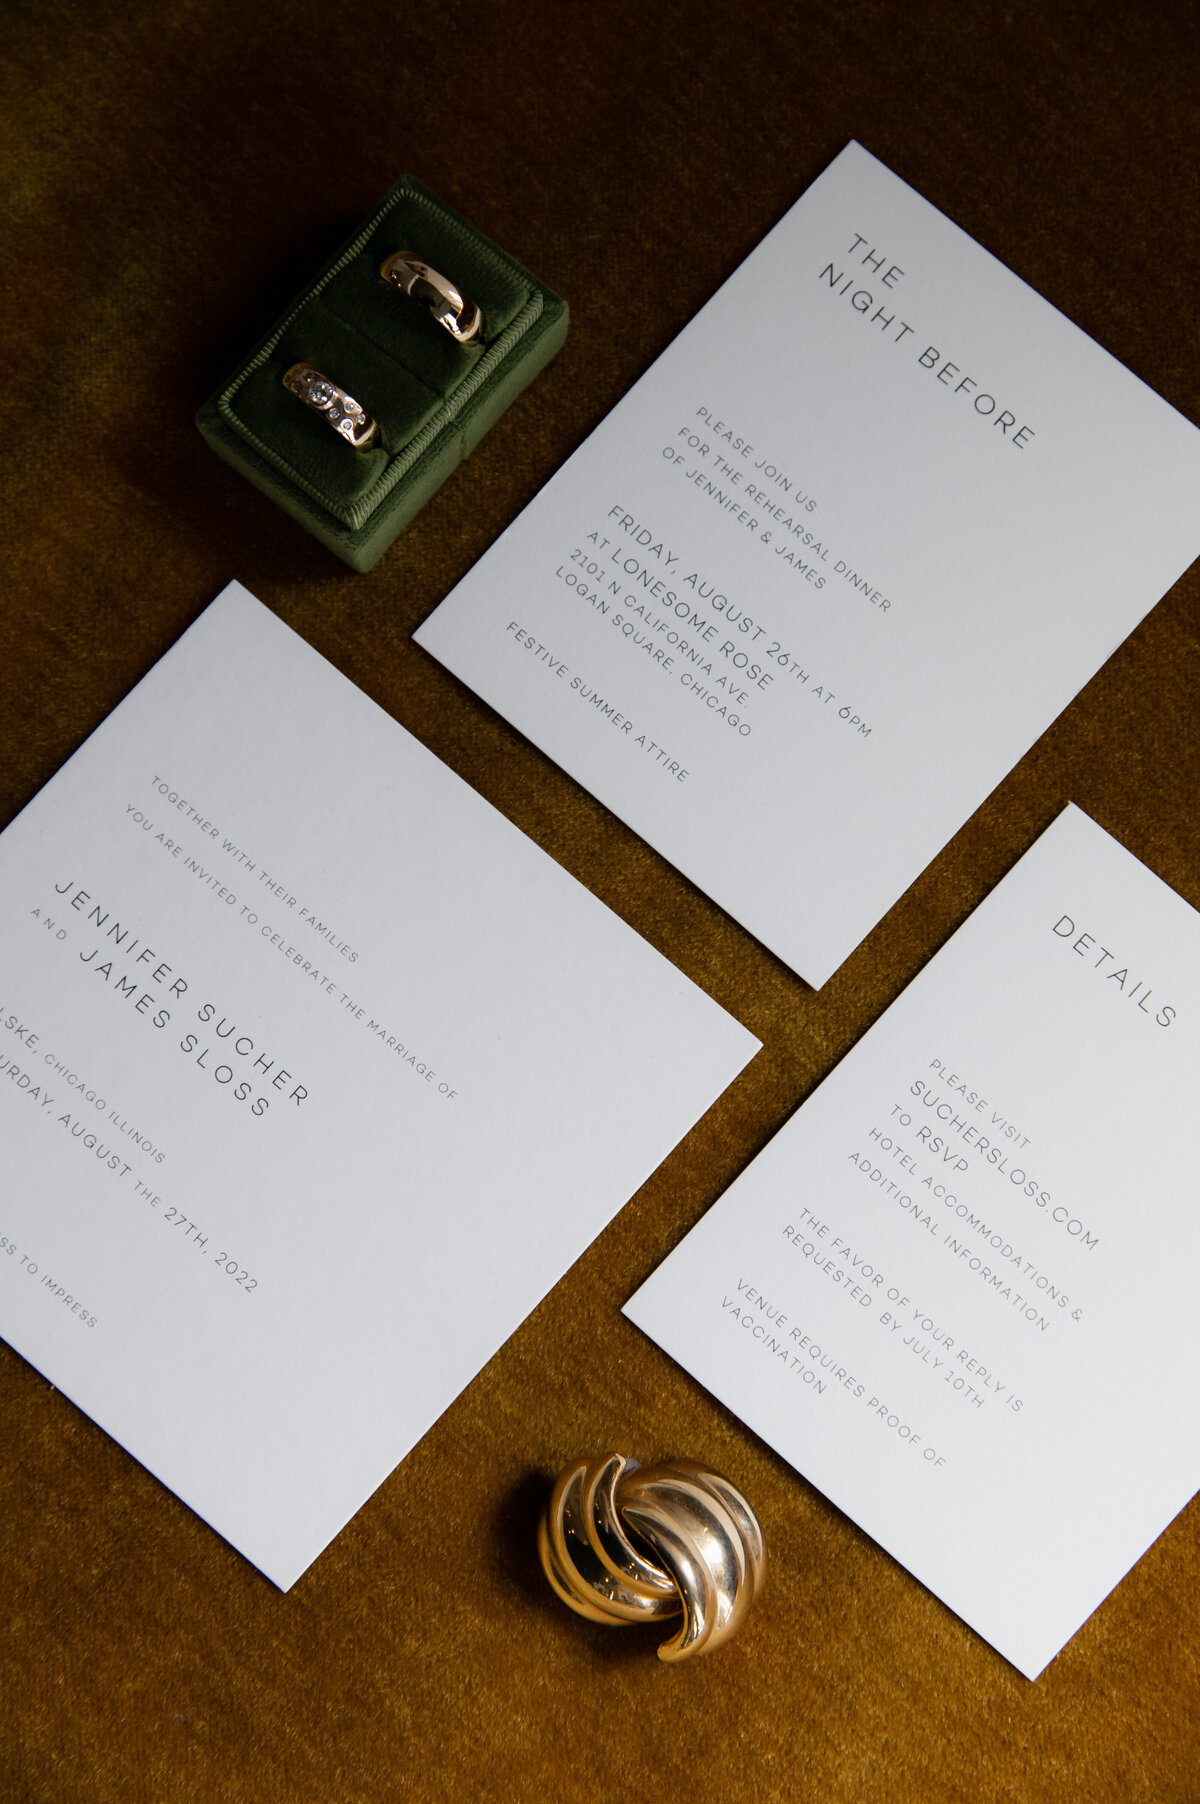 Minimalist wedding invitations, wedding bands in a green, velvet case and golden cuff links displayed on a wooden table at Chicago wedding.